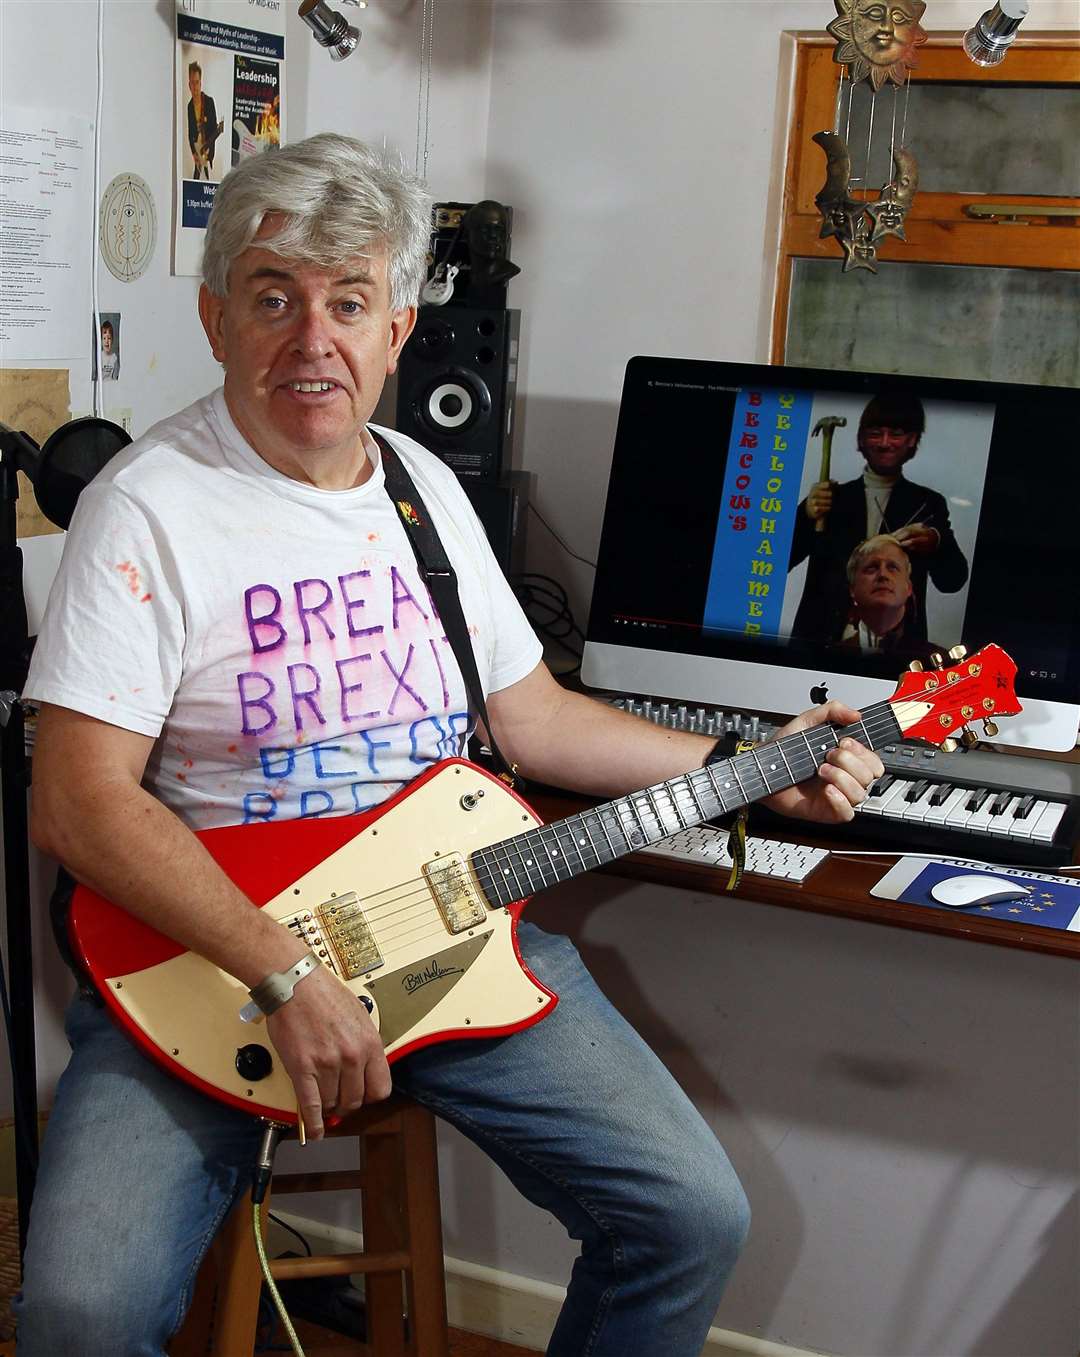 Peter has written an album which has been popular on Amazon, pictured at his home in Gillingham. Picture: Sean Aidan